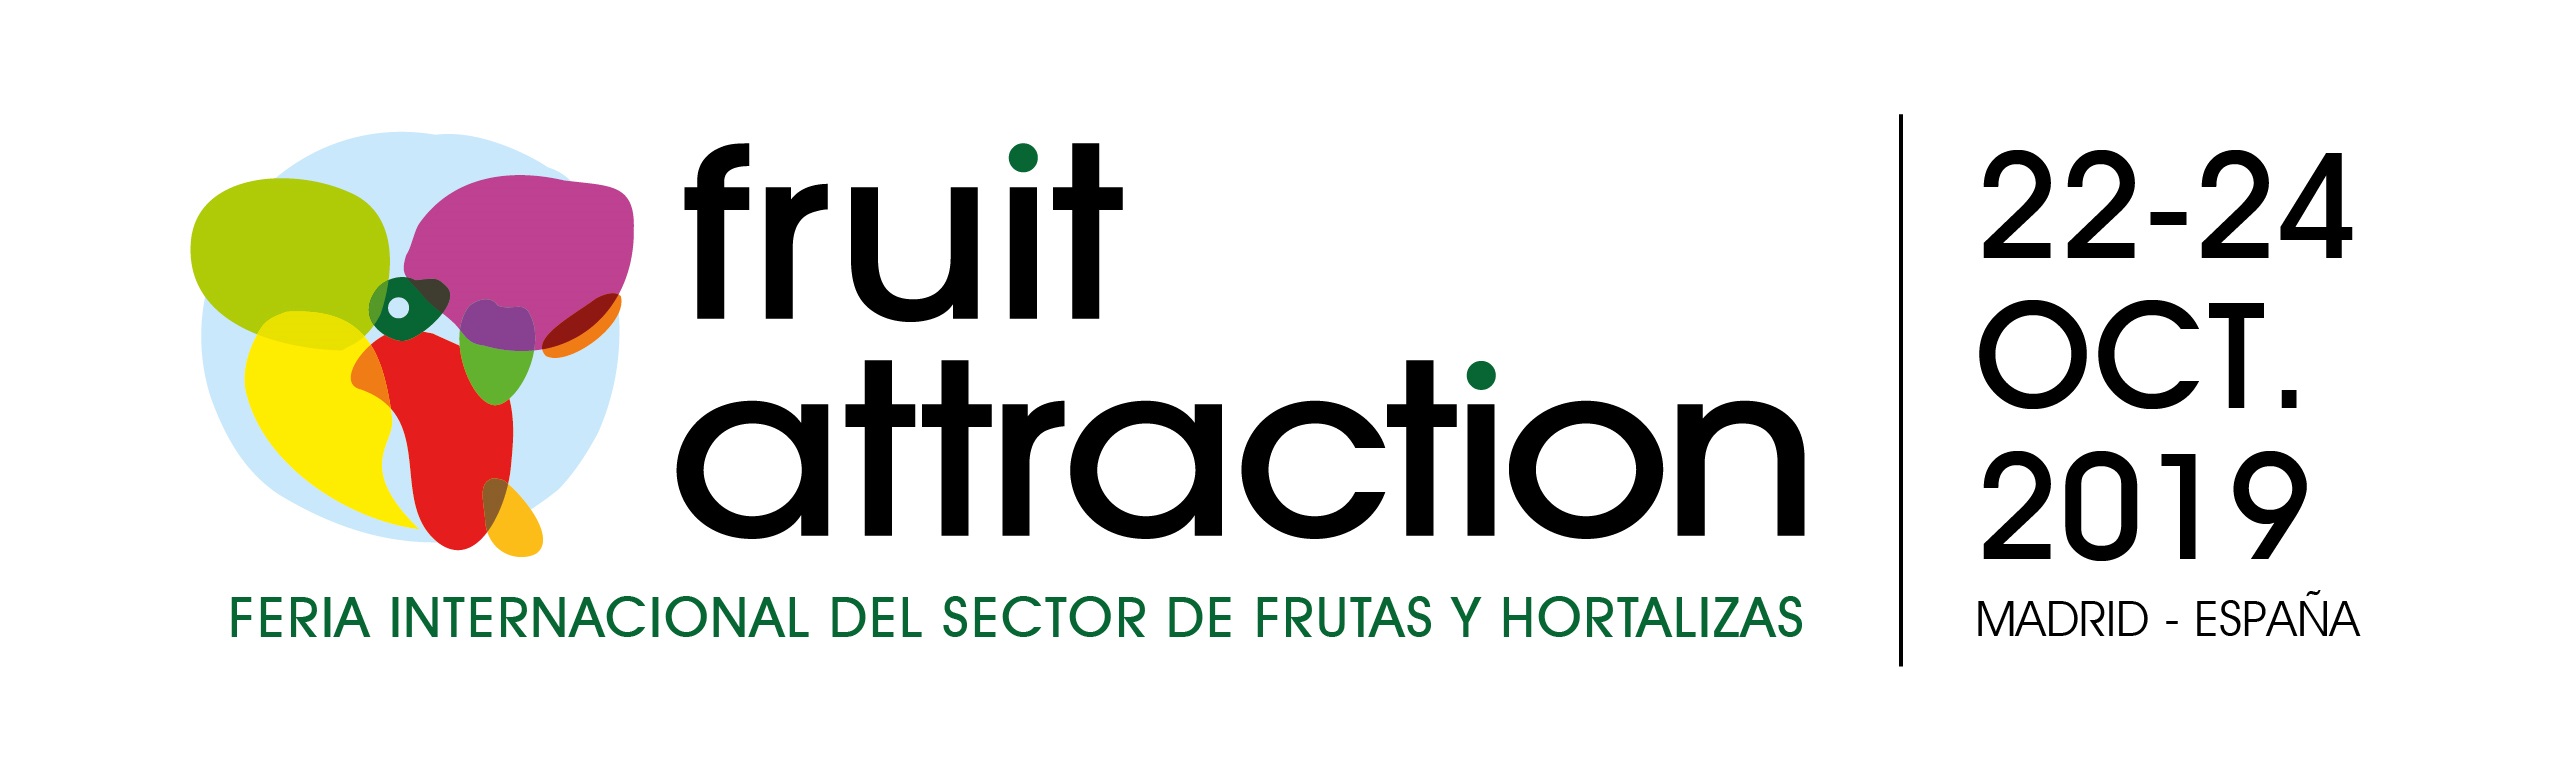 Fruit Attraction 2019 will host the first meeting of the contact group of France-Italy-Spain and Portugal of Uva de Mesa